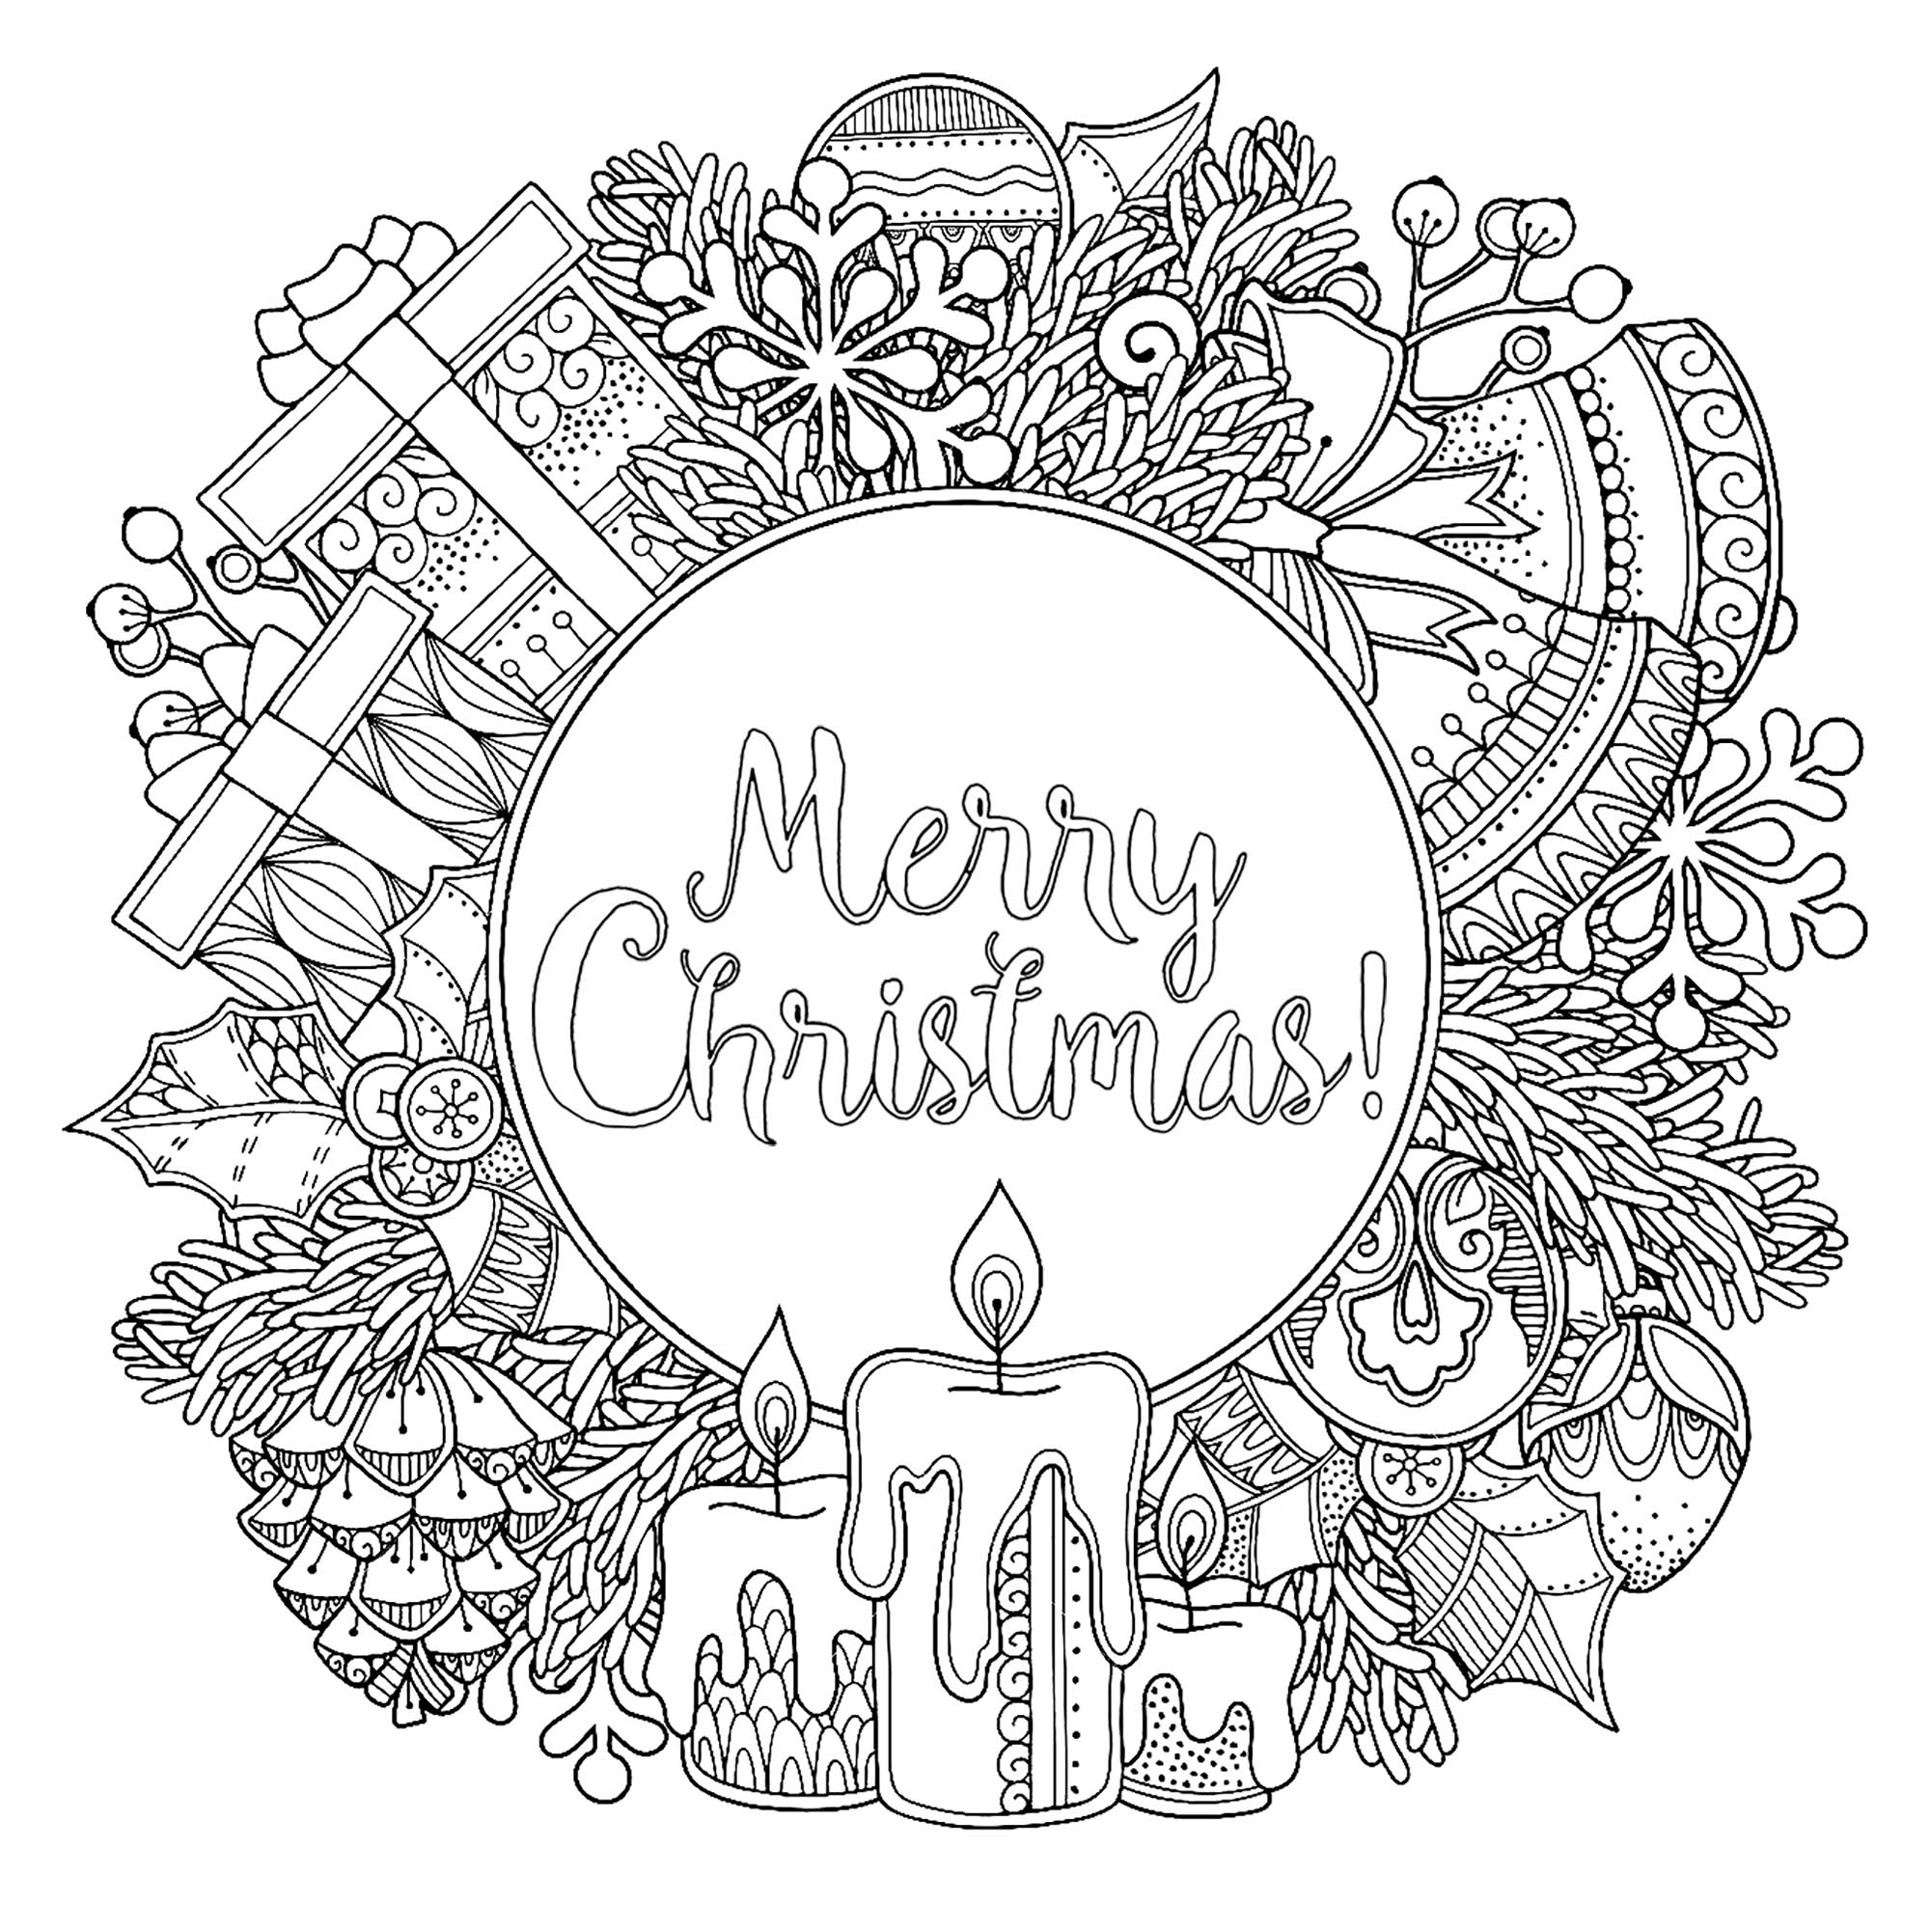 Download Doodl Christmas wreath - Christmas Adult Coloring Pages